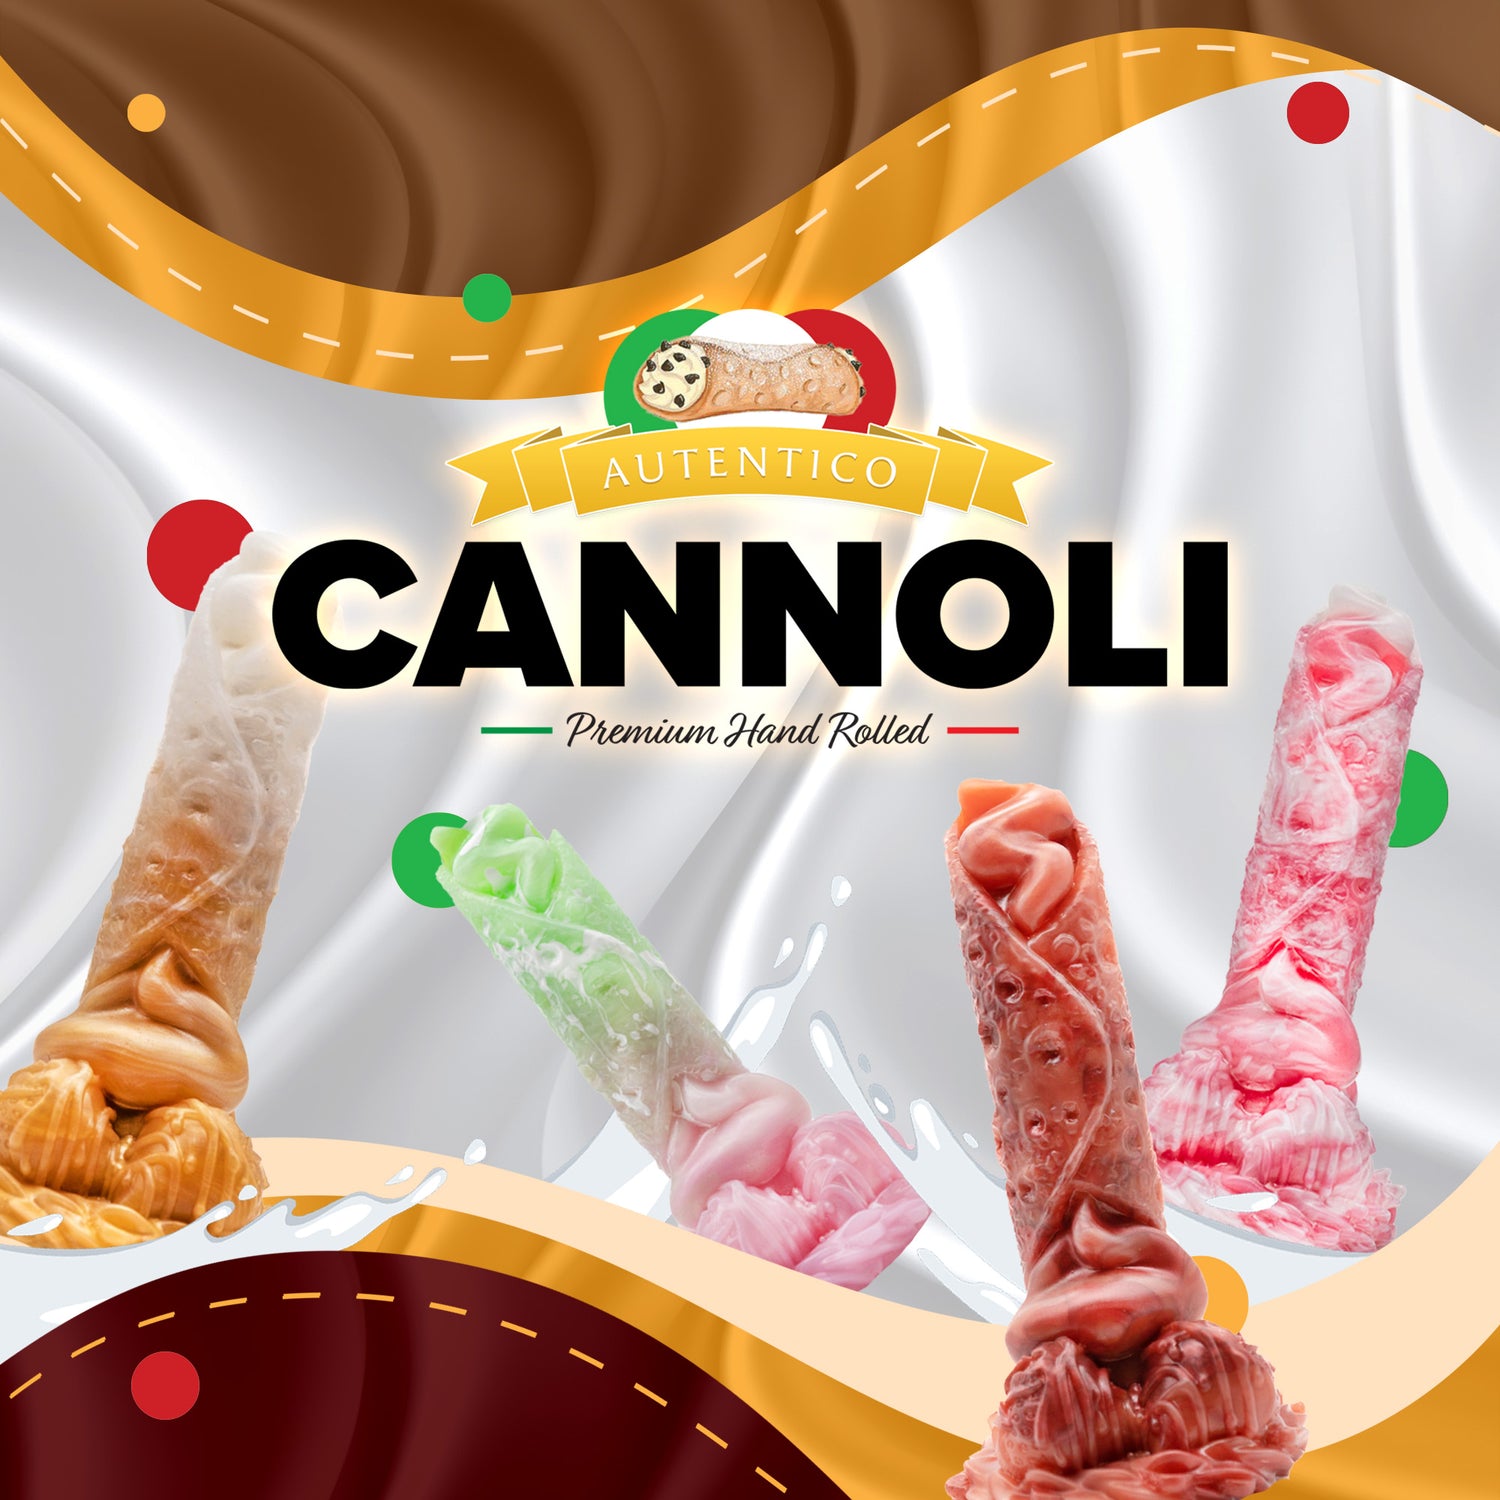 Cannoli the Pastry Dildos